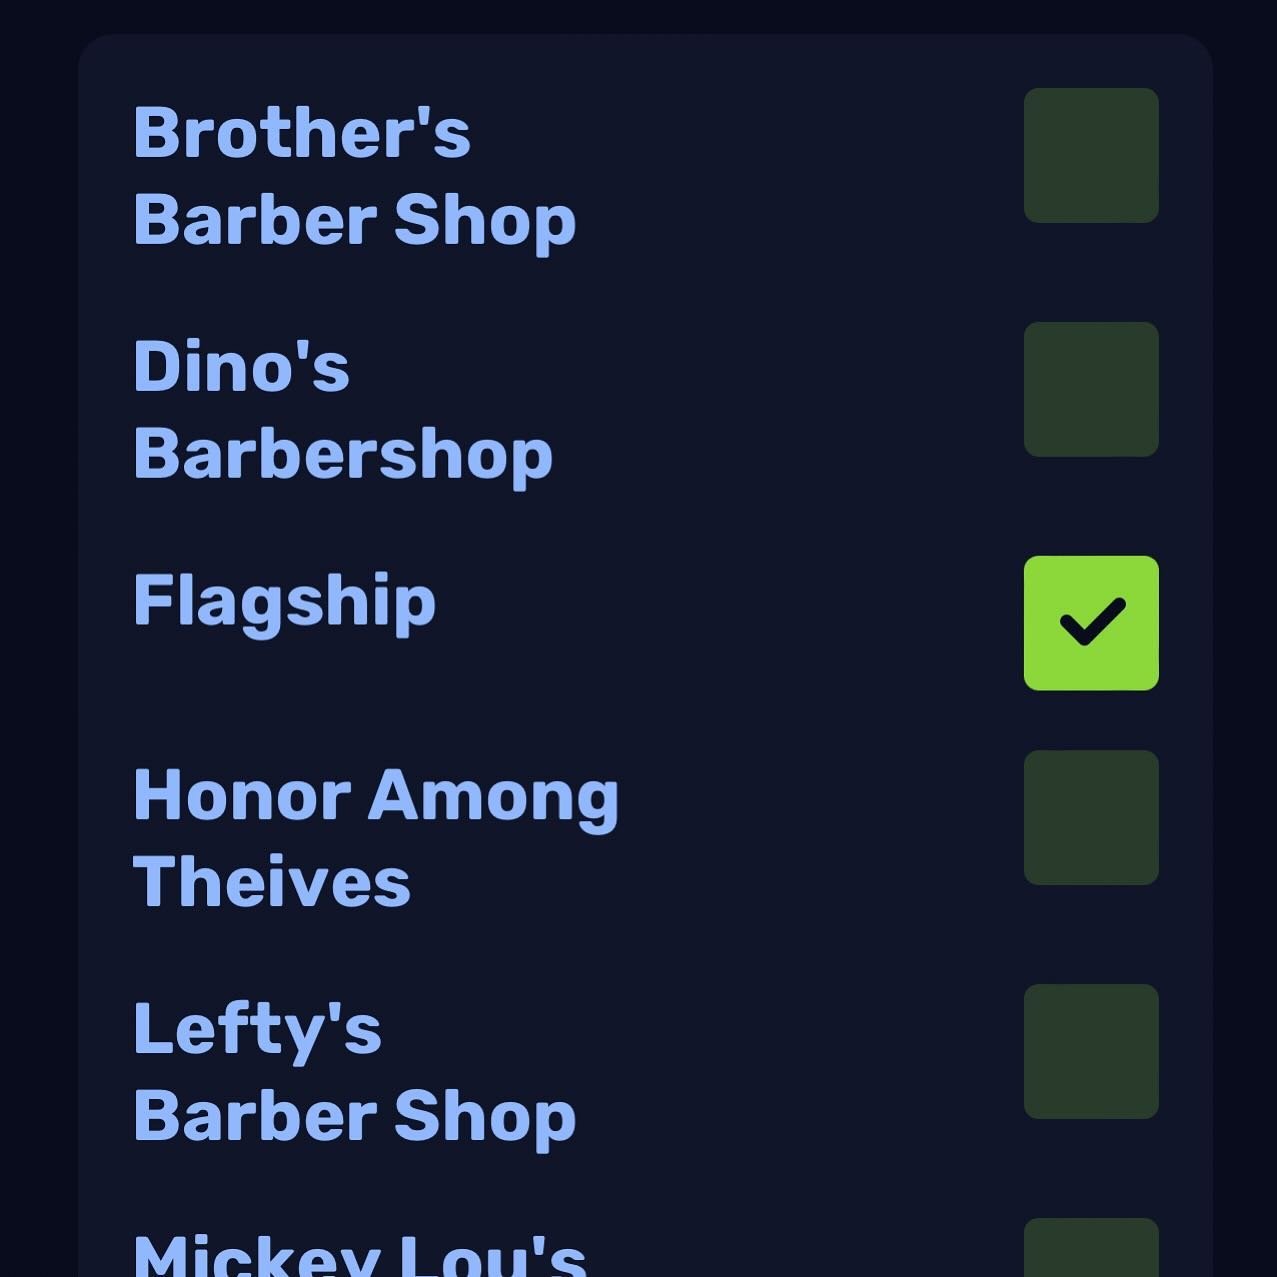 We&rsquo;re still in the running for best barbershop in San Diego! Don&rsquo;t forget to vote. The link is on our website at flagshipbarbershop.com
.
Thank you so much to everyone who&rsquo;s been voting. We appreciate you all.